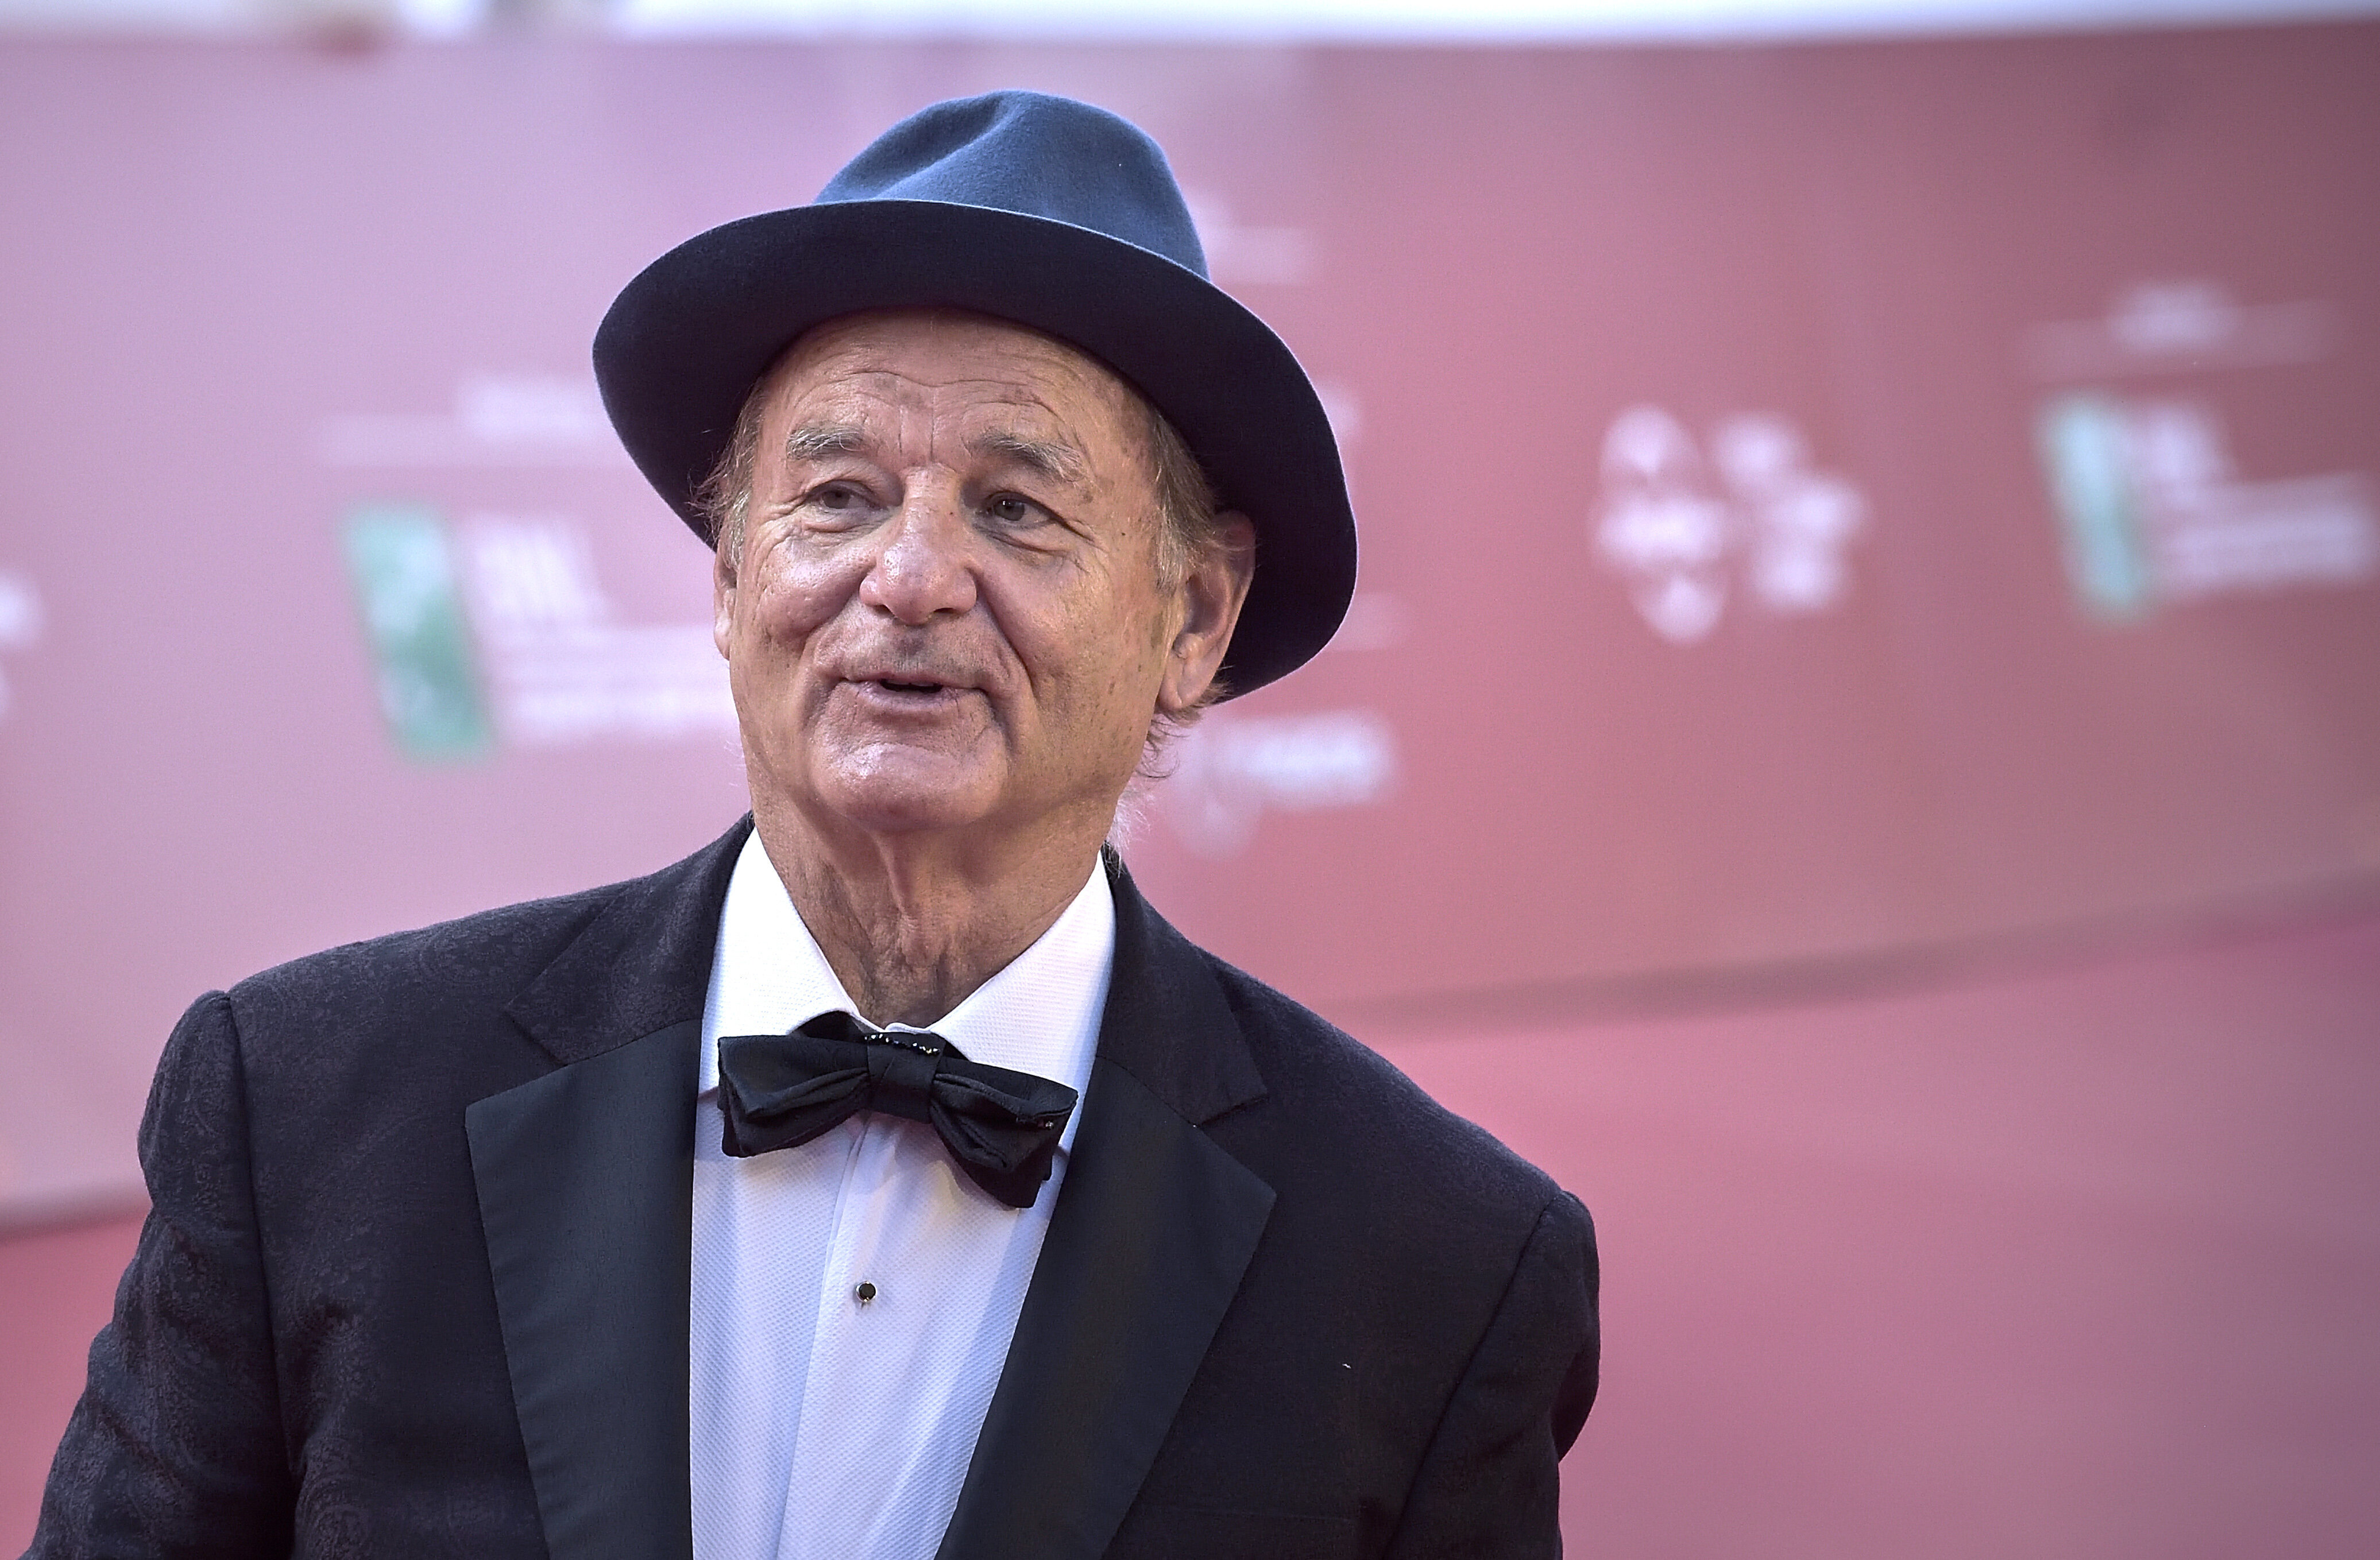 Guess Whoâ€™s Back! Bill Murray Confirms Heâ€™s In â€˜Ghostbusters: Afterlifeâ€™